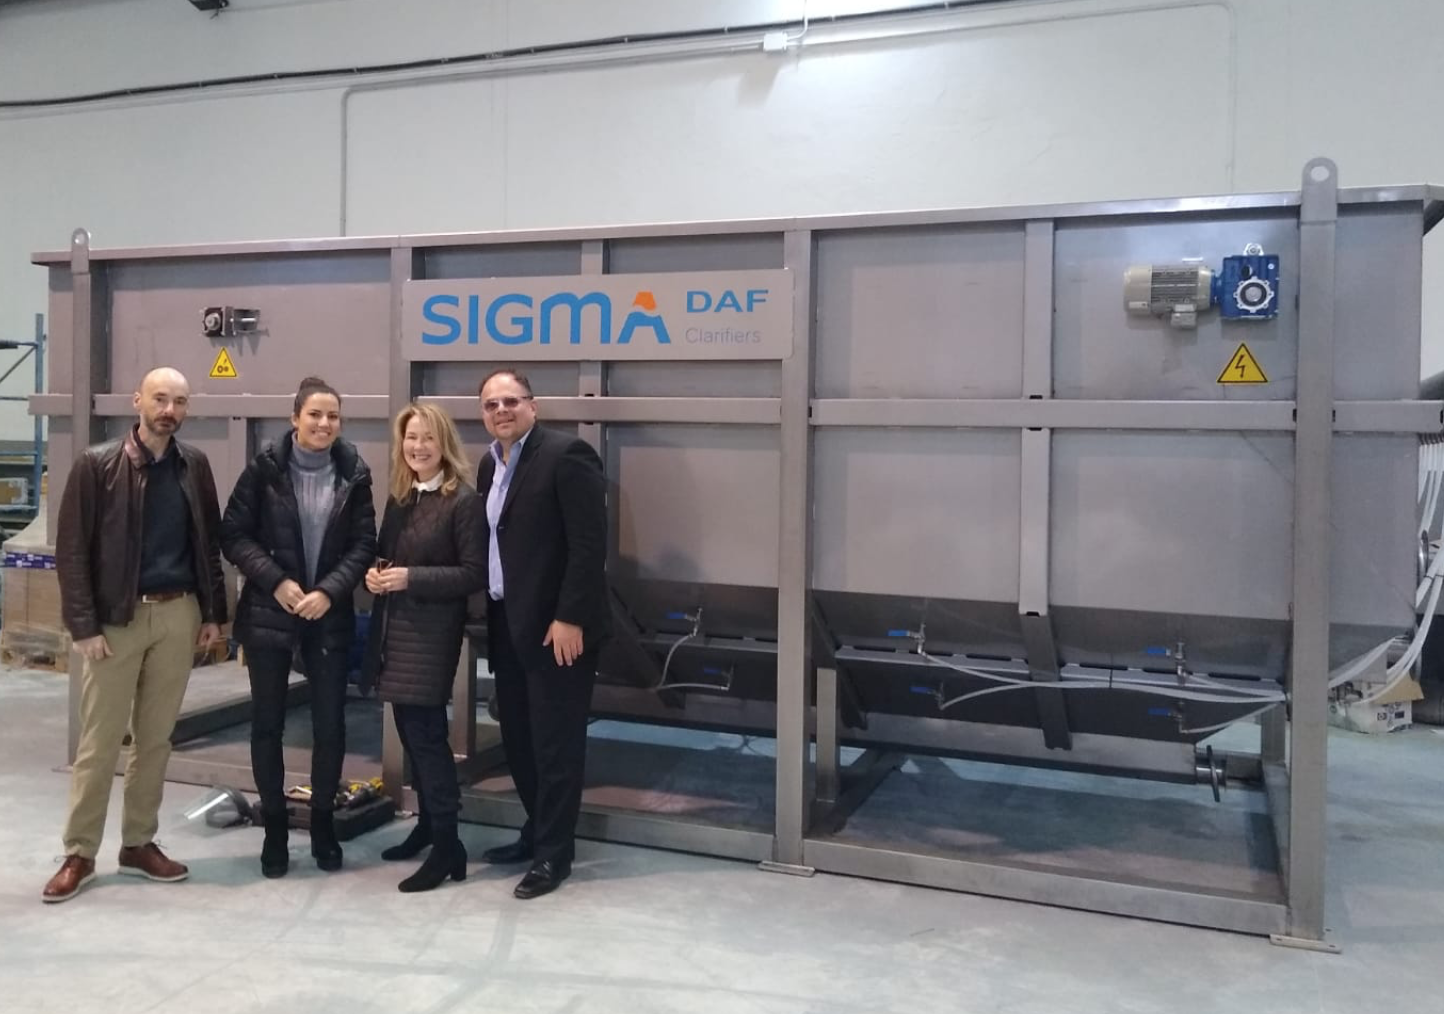 People stand under a SIGMA DAF sign.